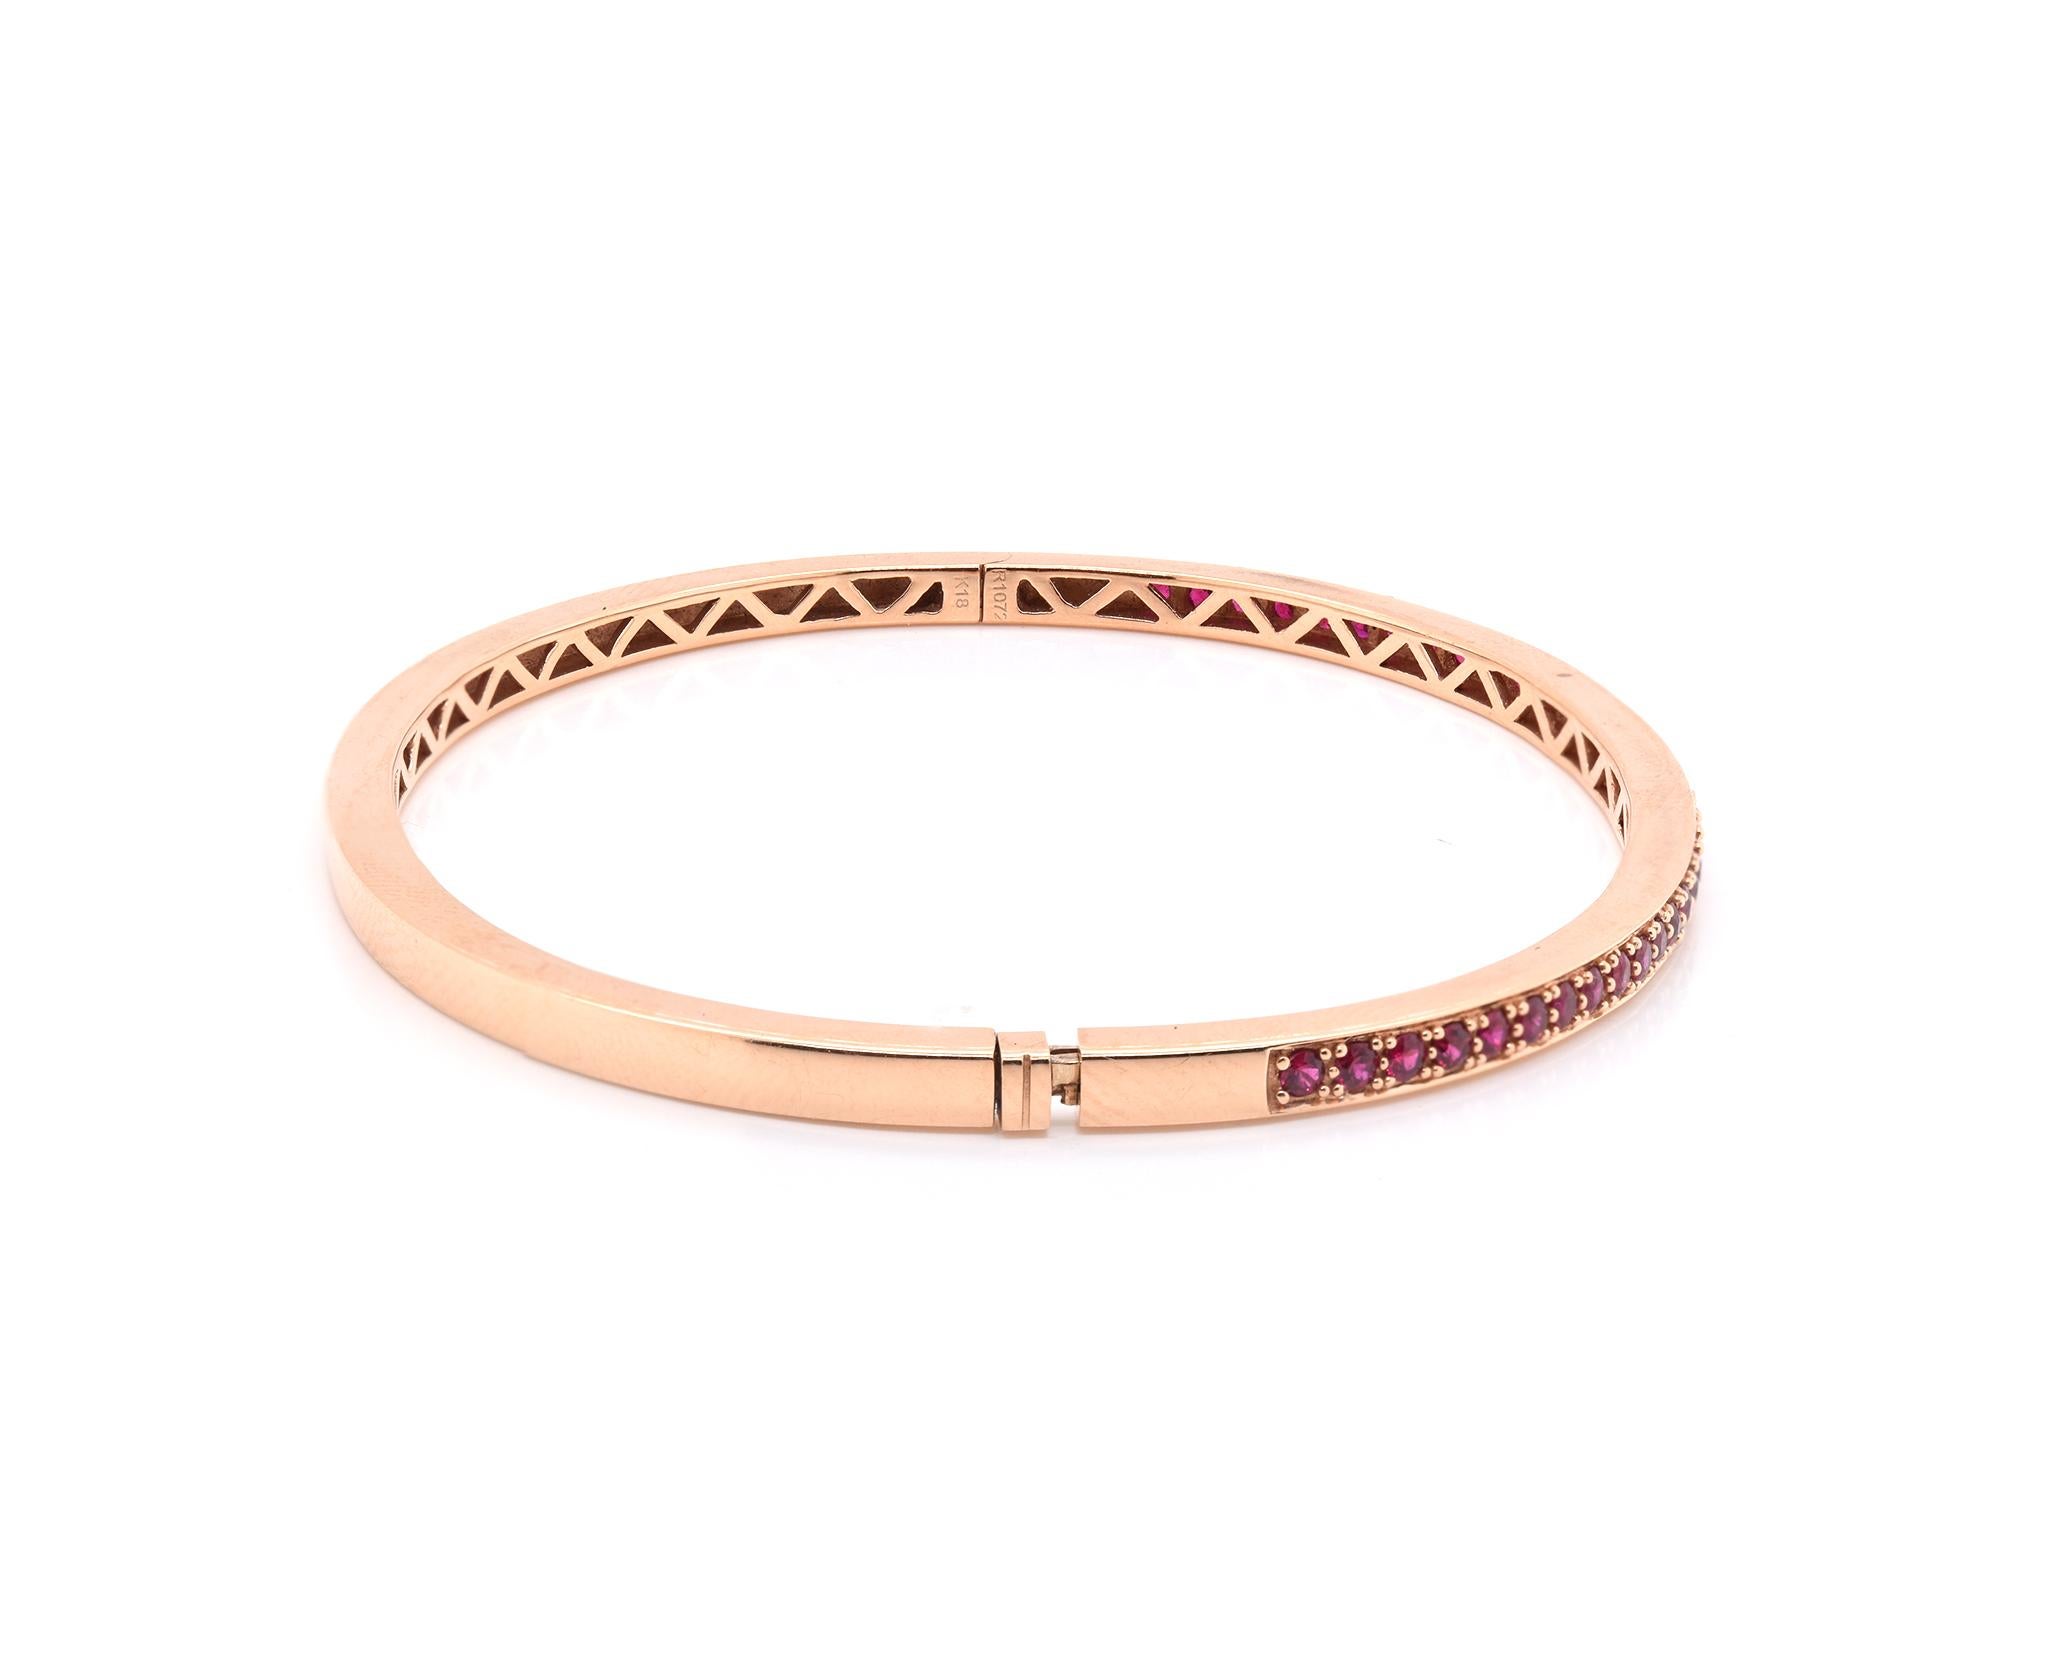 Designer: custom
Material: 18K rose gold
Ruby: 38 round cut = 1.07cttw
Color: Pigeons Blood
Clarity: AAA+
Weight:  12.10 grams
Dimensions: bracelet measures 6.5-inches
